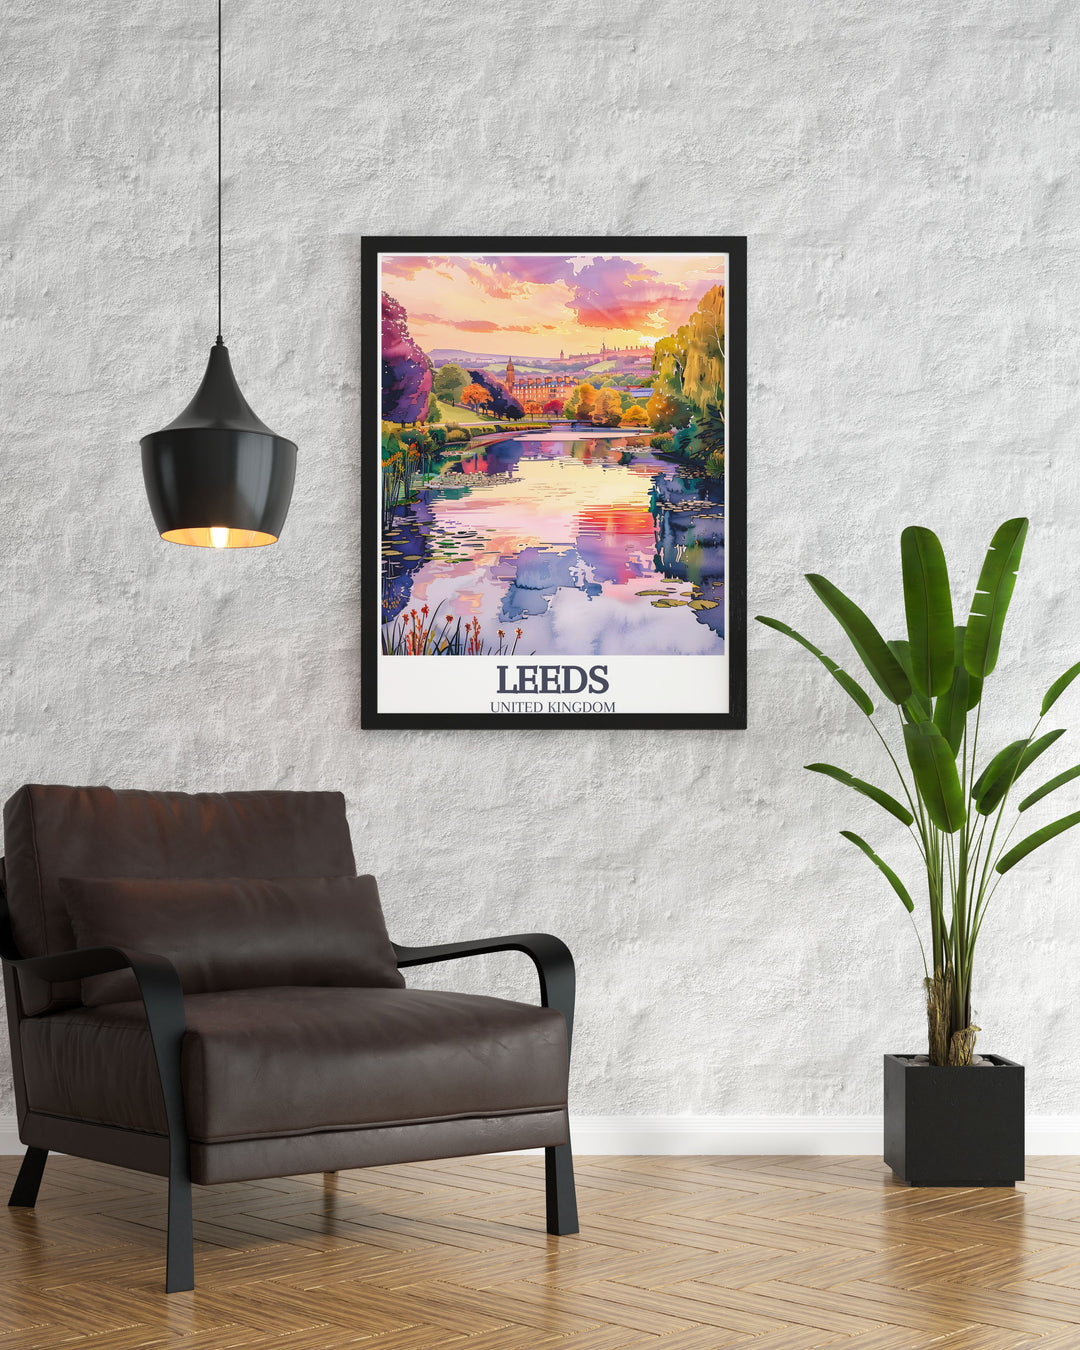 Captivating Roundhay Park and Waterloo Lake print perfect for England travel gifts. This stunning artwork highlights the serene environment of Leeds and makes an excellent addition to any collection of England wall art.